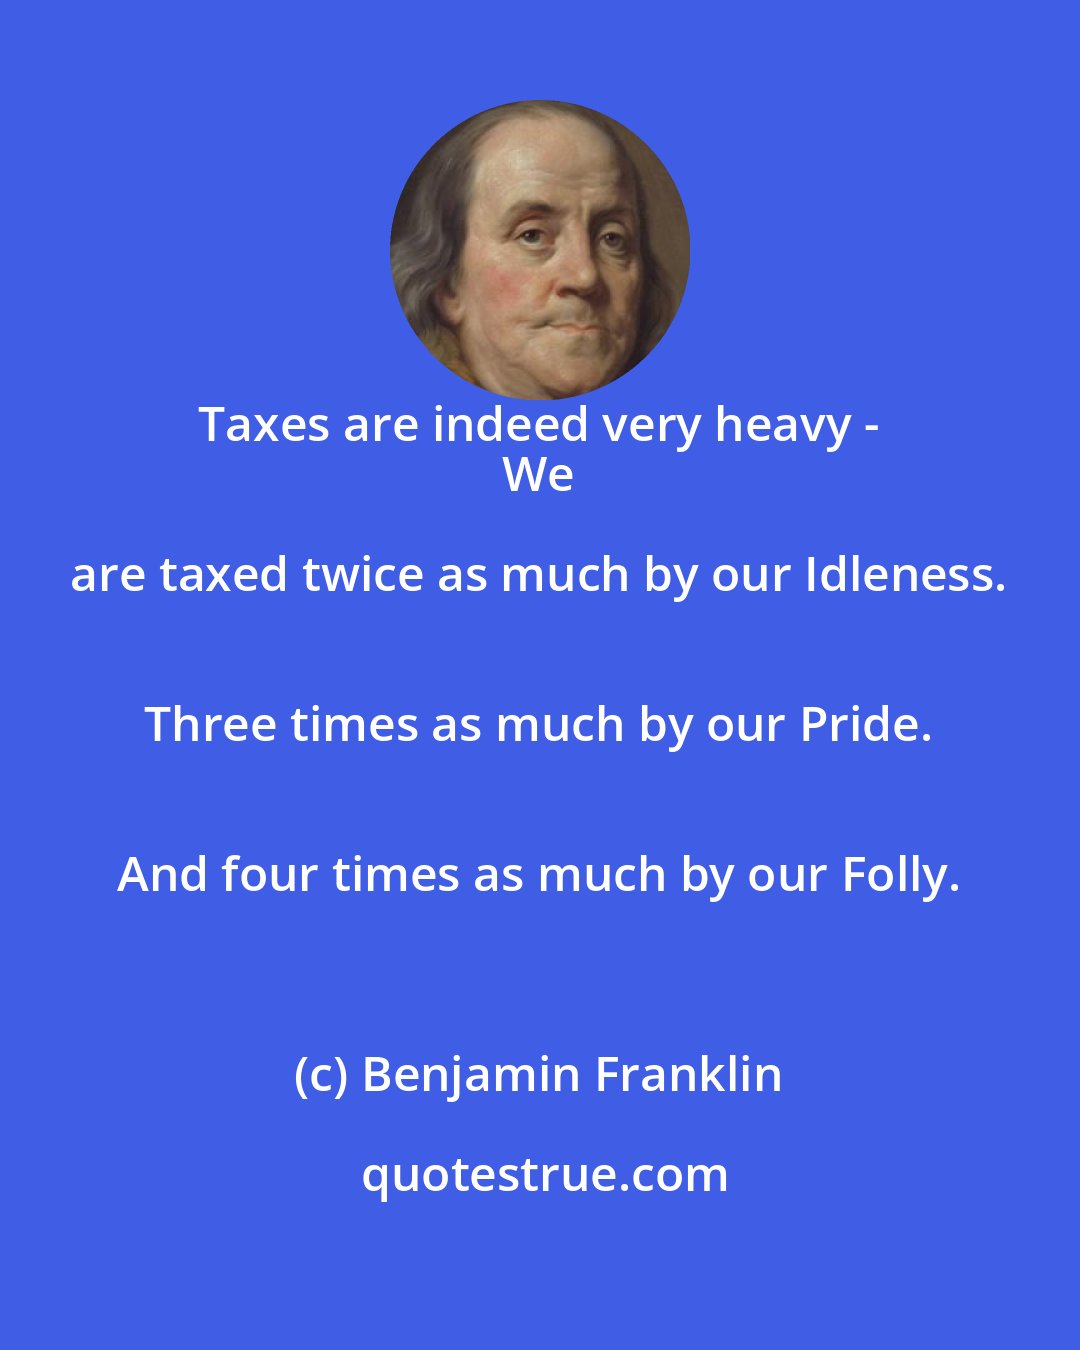 Benjamin Franklin: Taxes are indeed very heavy - 
 We are taxed twice as much by our Idleness. 
 Three times as much by our Pride. 
 And four times as much by our Folly.